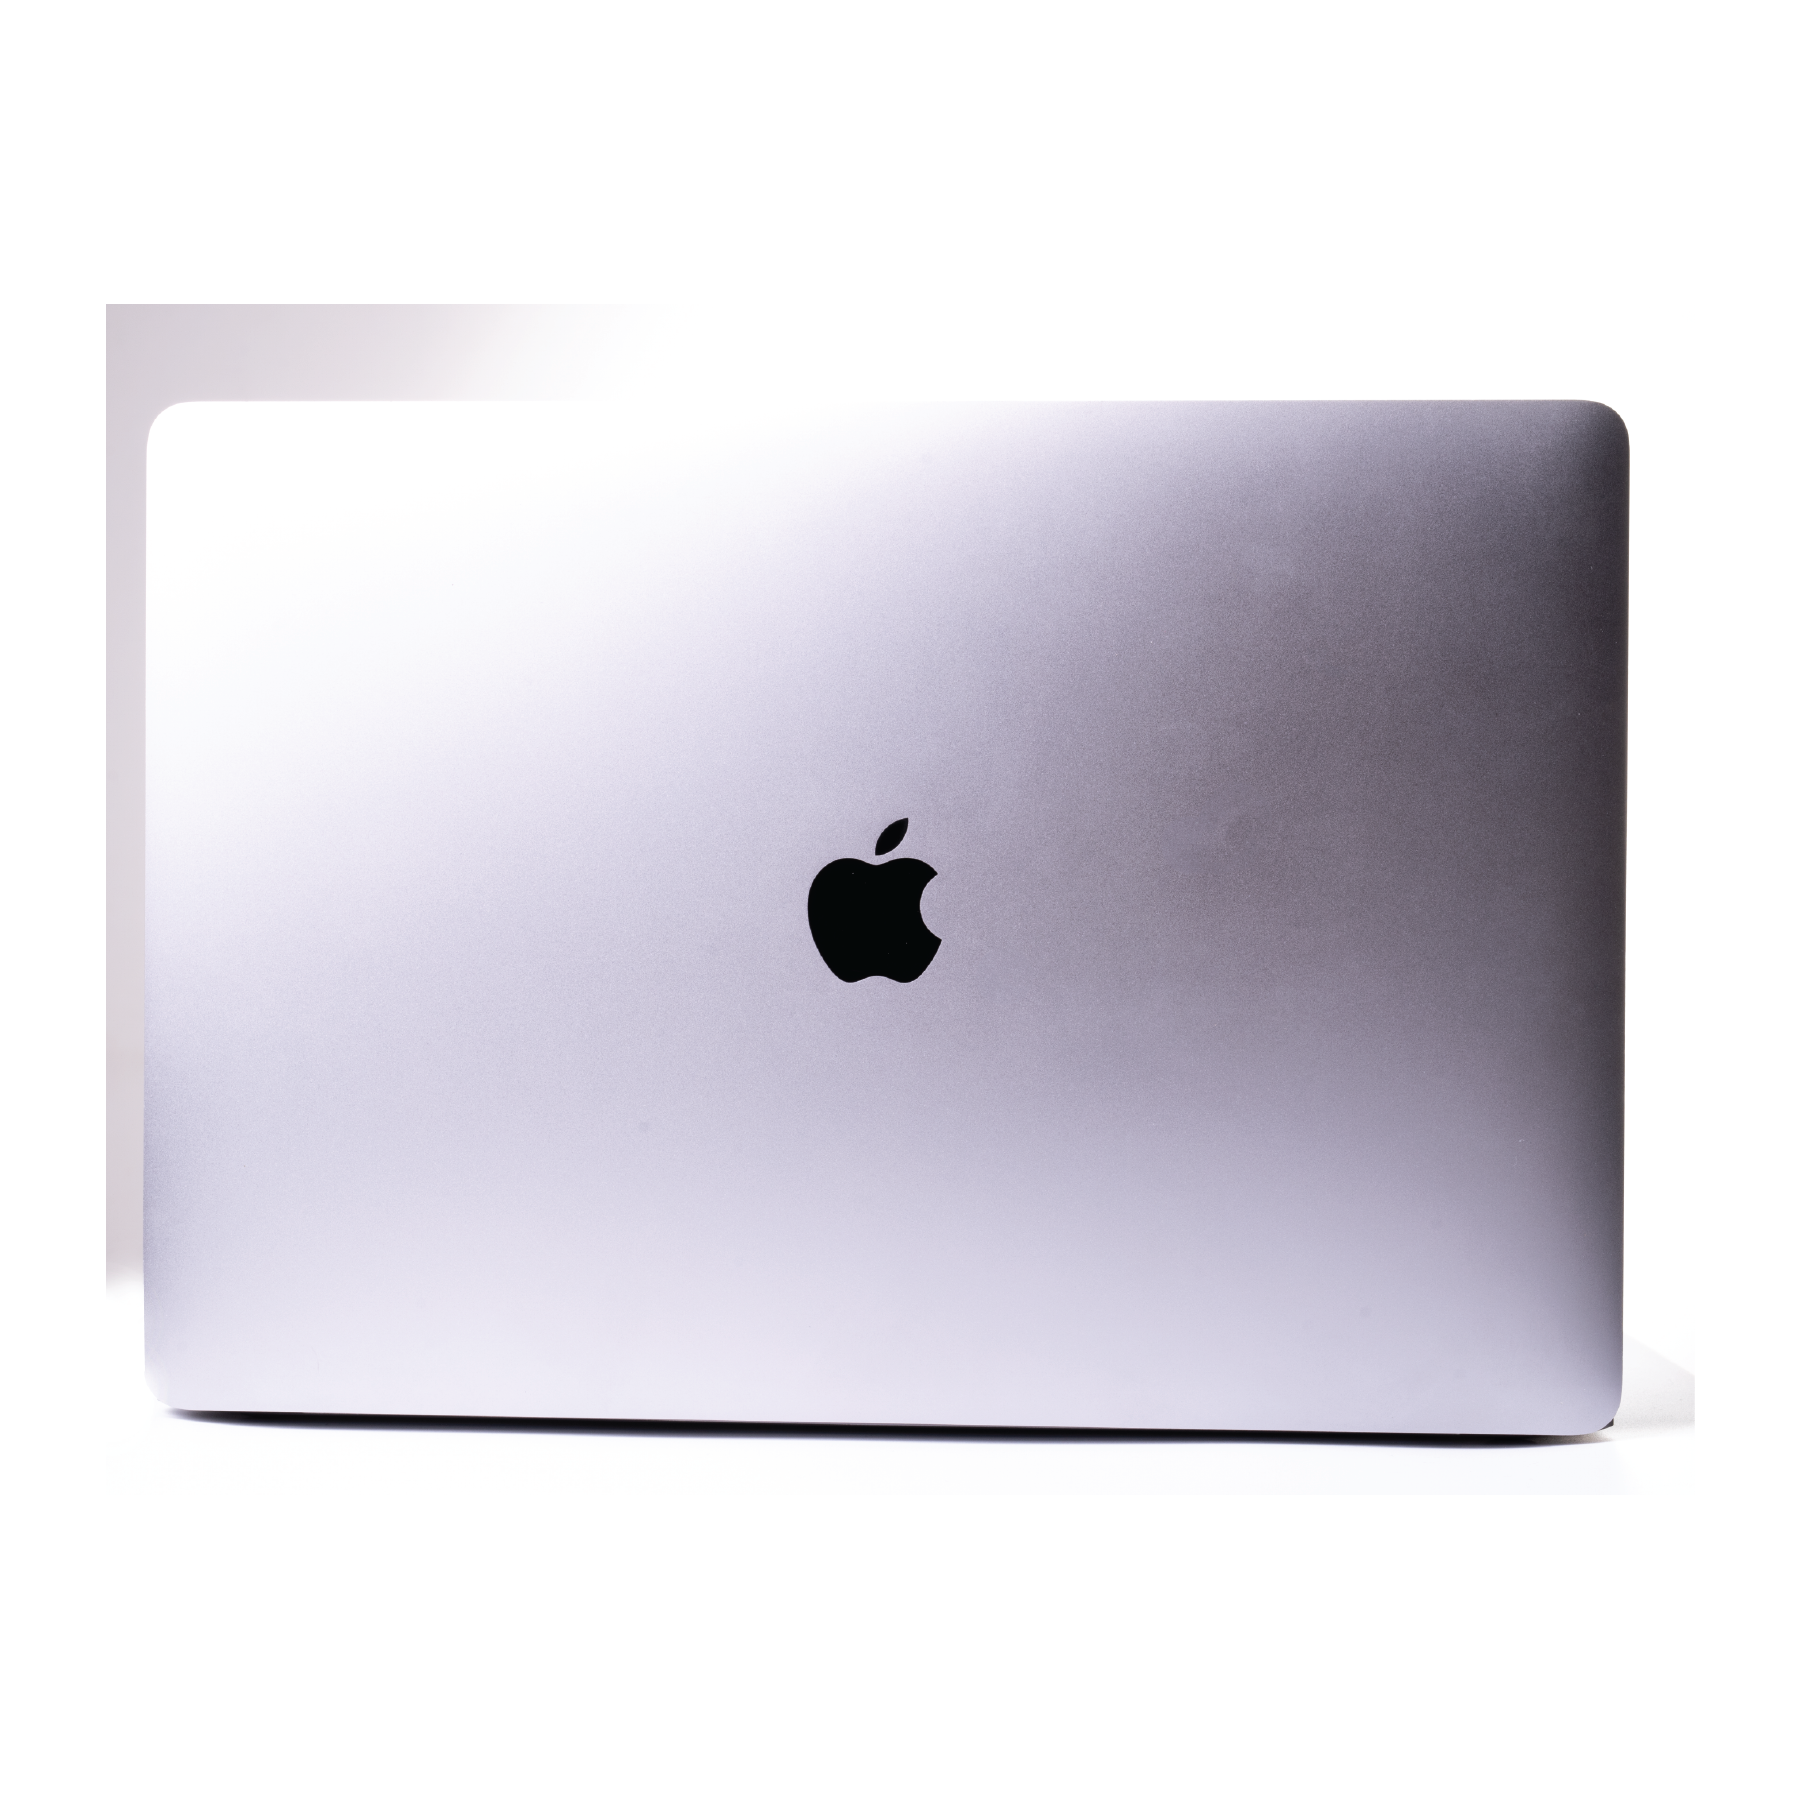 'Best' Condition Mac - iStore Pre-owned